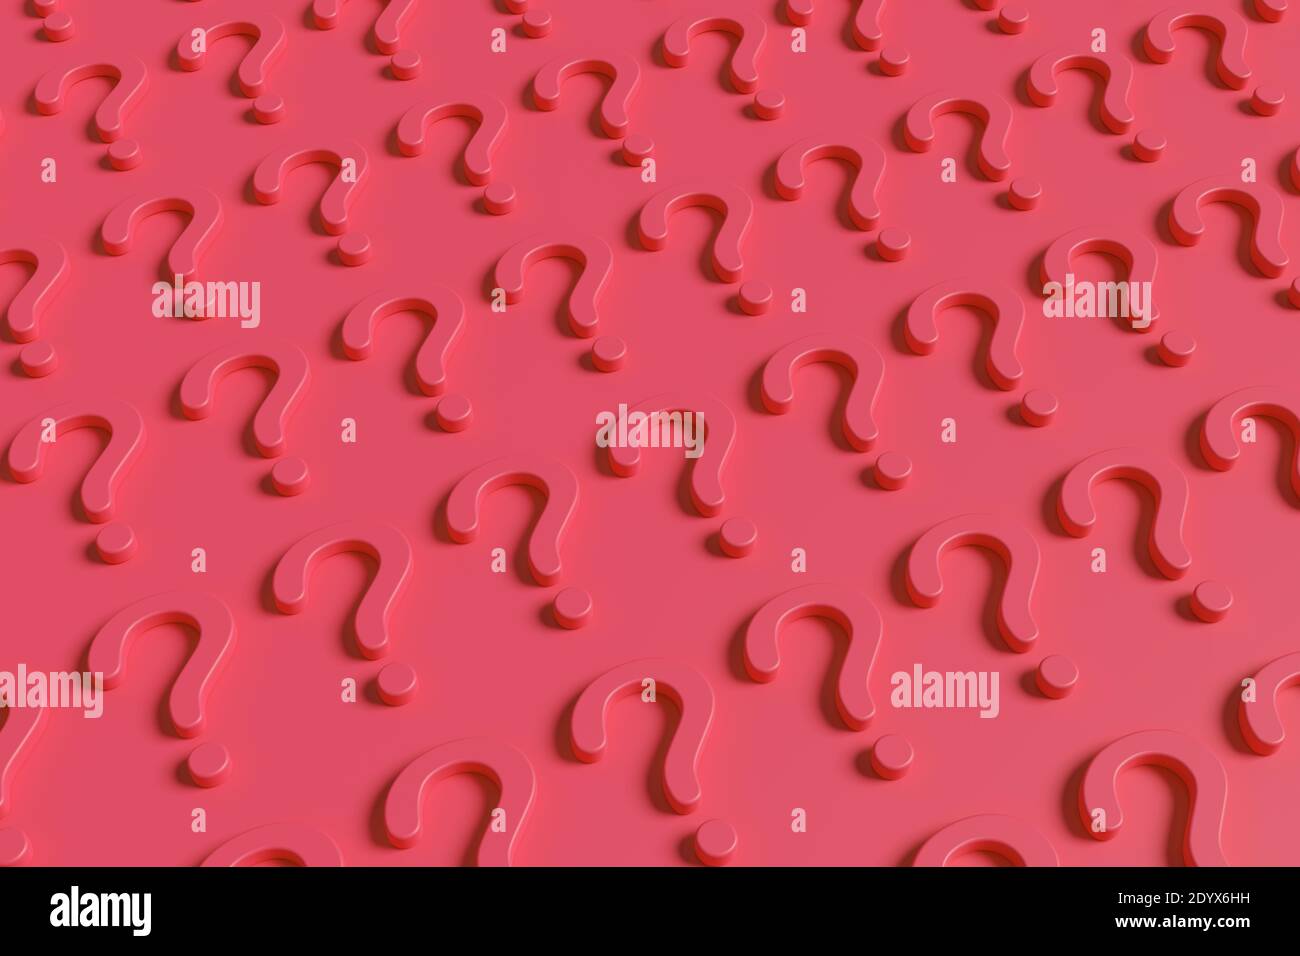 Red question mark pattern on red background. 3d illustration. Stock Photo